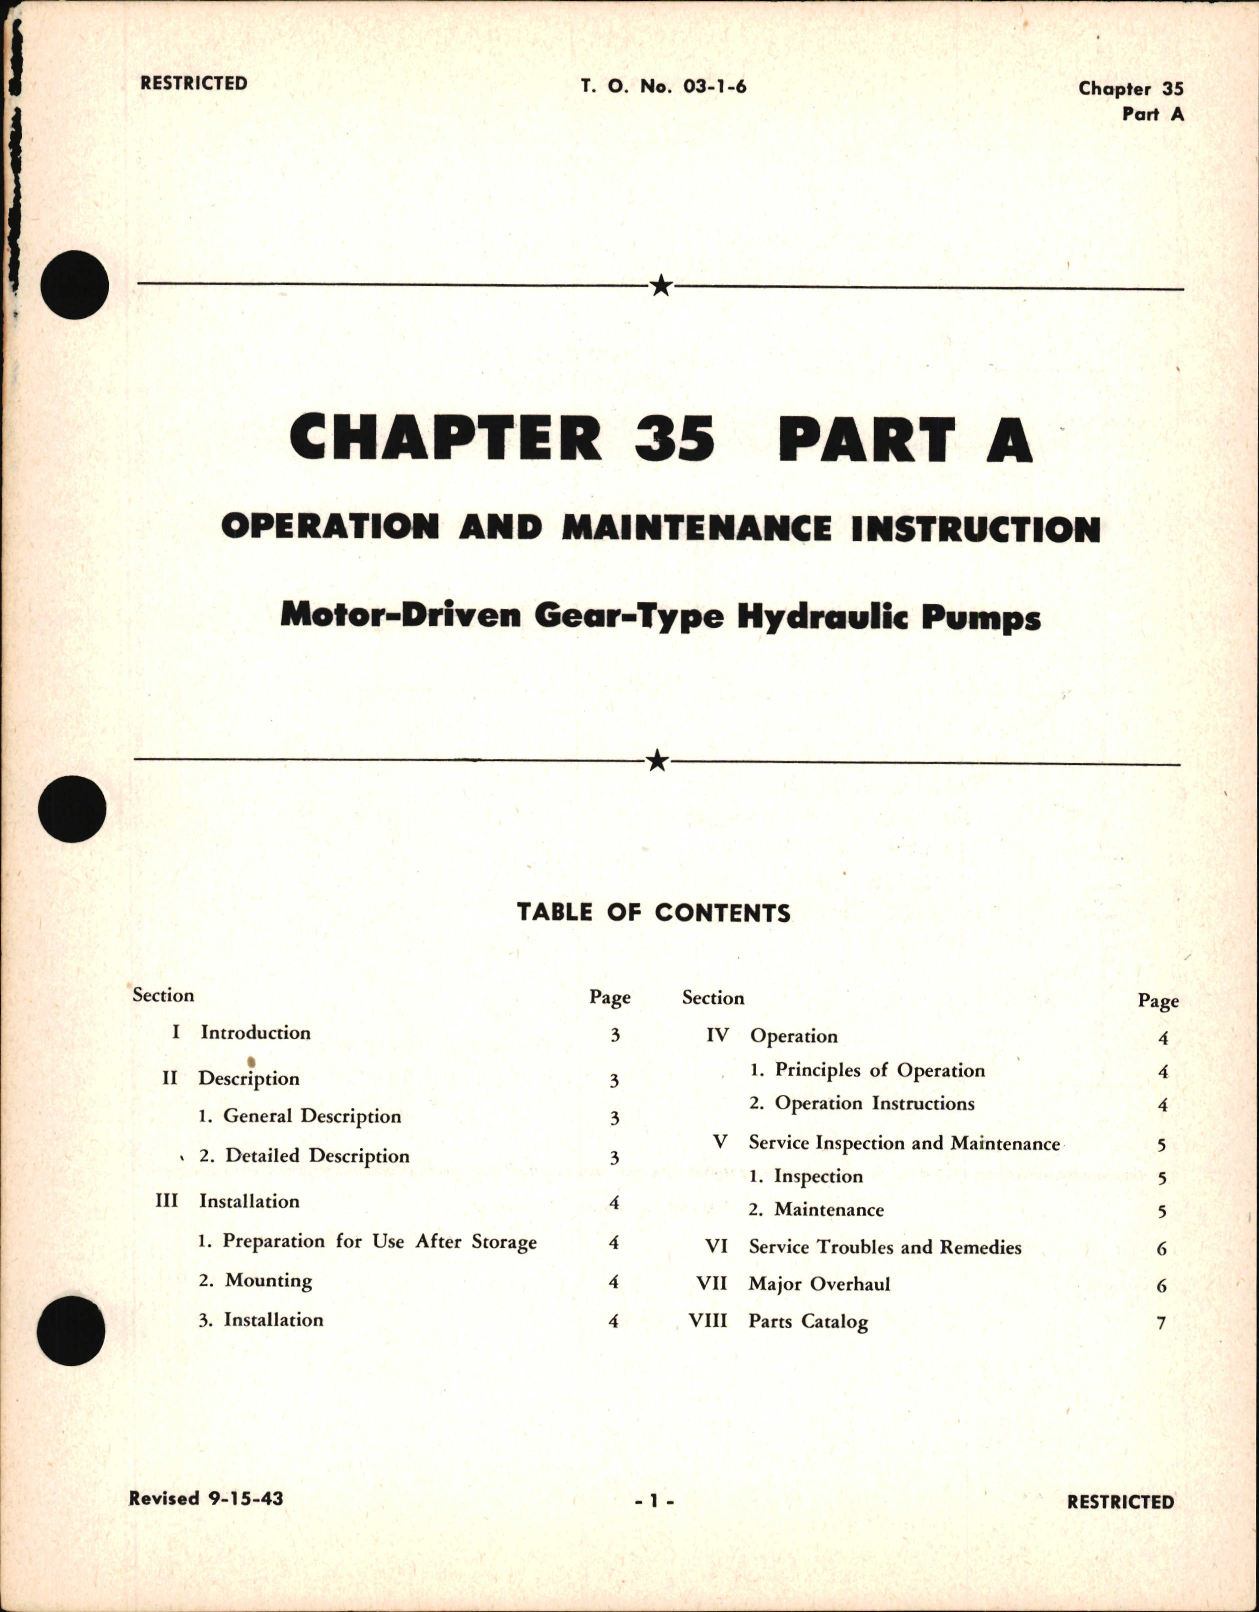 Sample page 1 from AirCorps Library document: Operation & Maintenance Instruction for Motor Driven Gear Type Hydraulic Pumps, Chapter 35 Part A